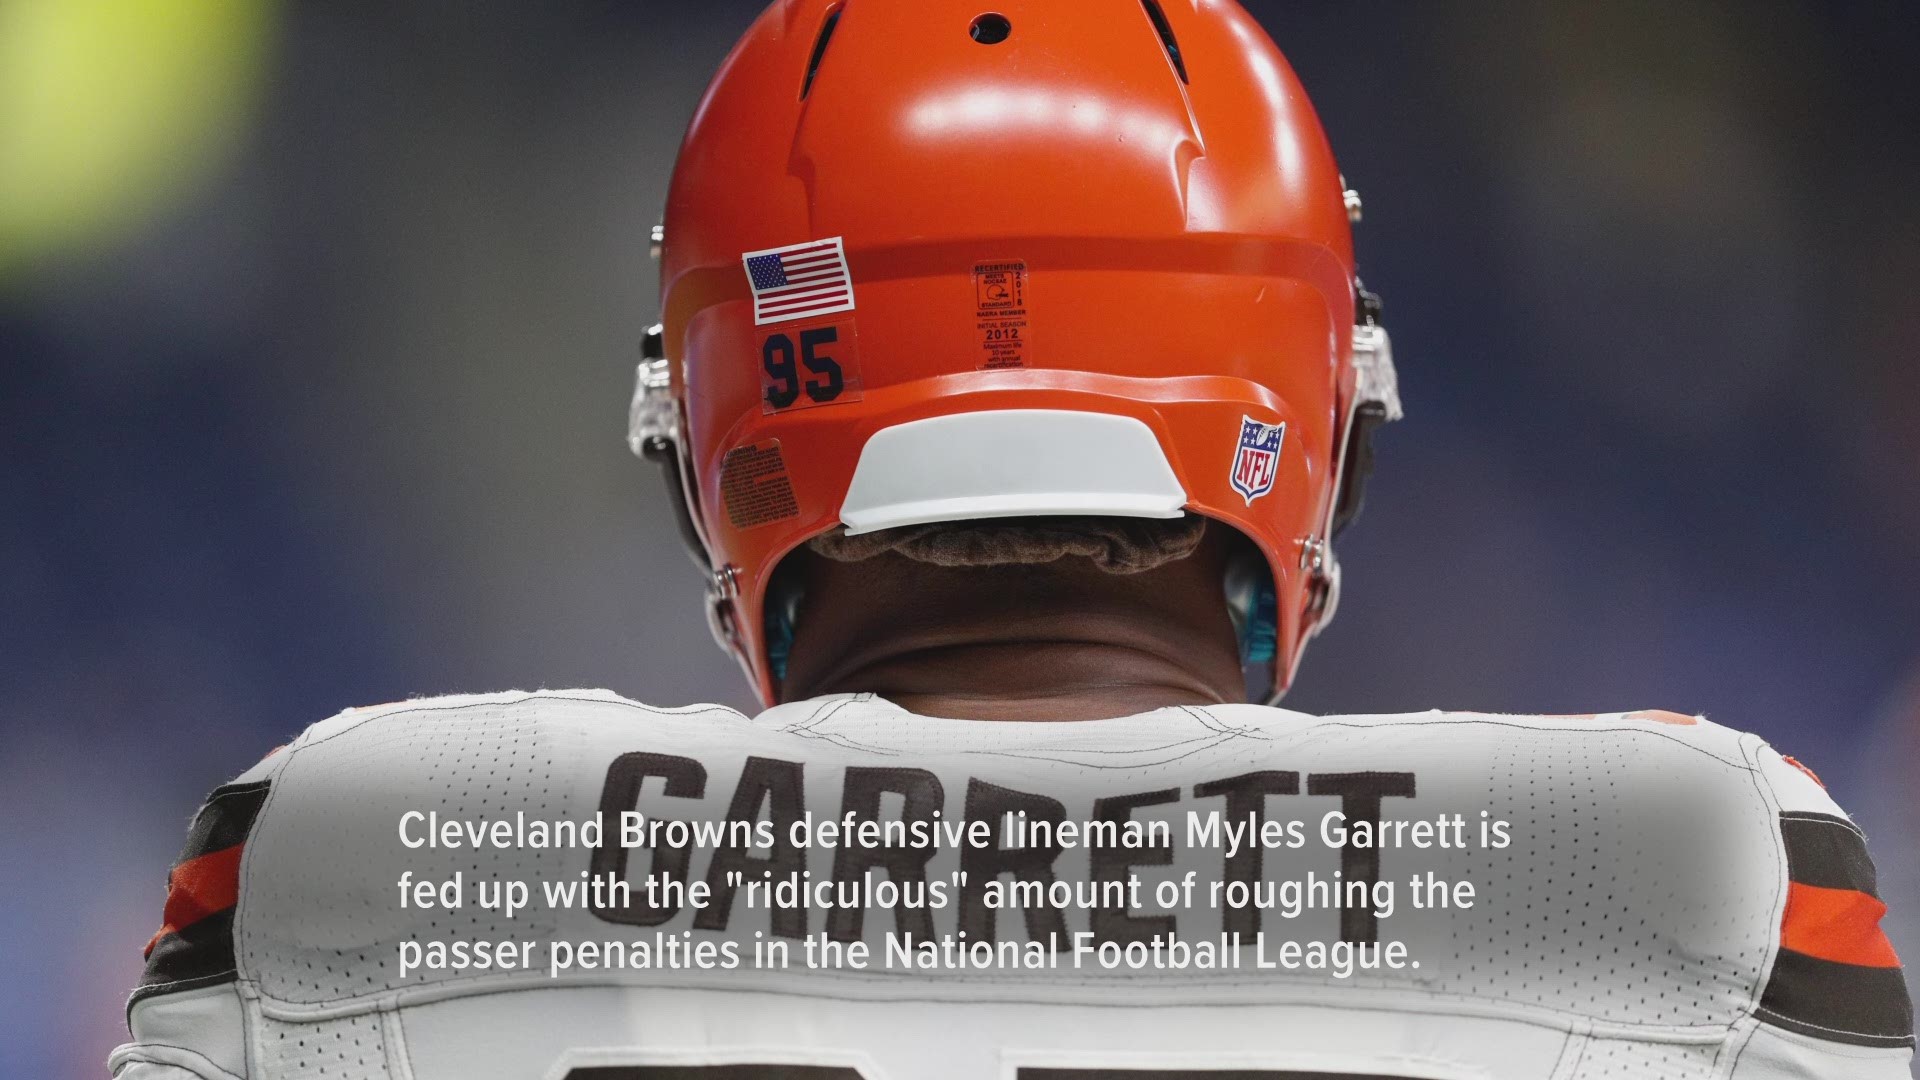 Cleveland Browns DL Myles Garrett fed up with 'ridiculous' roughing-the-passer penalties